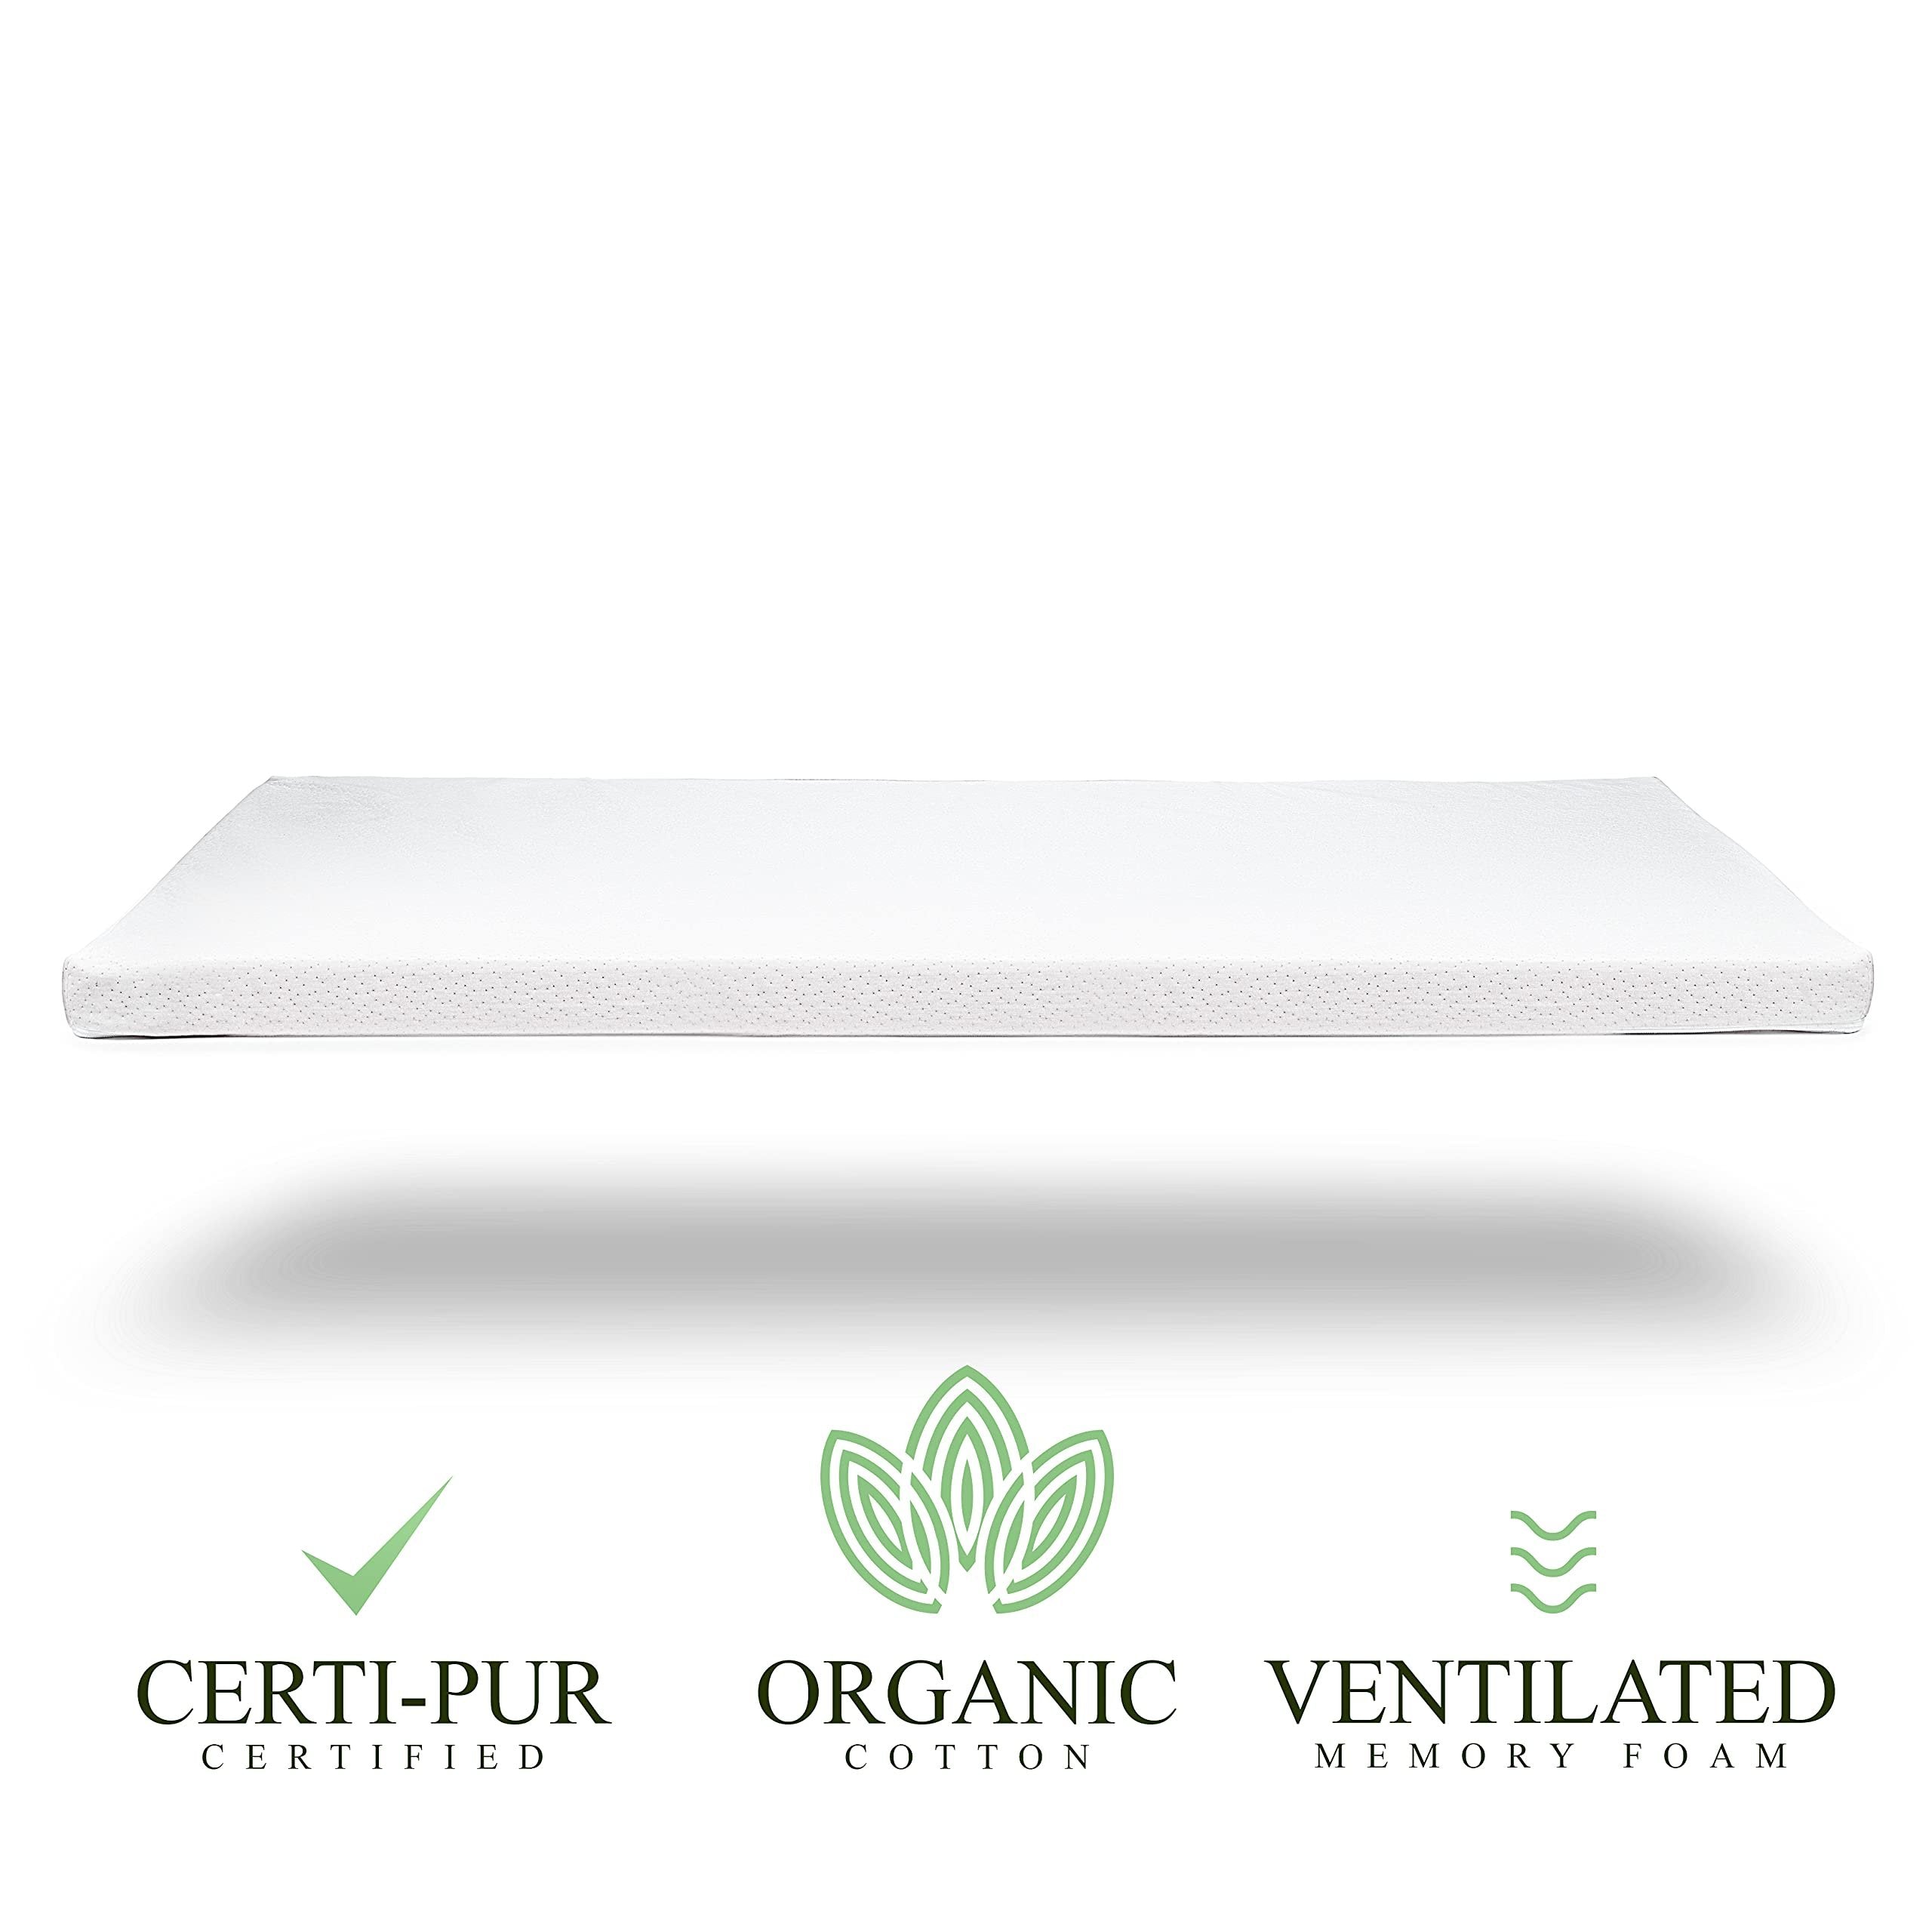 Organic Cotton Pack n Play Topper | CertiPUR-US Baby Mattress Pad for Portable Toddler Bed & Playard w/Washable Waterproof Cover, Soft Ventilated Foam Padding, Nonslip Bottom, Travel Strap | 26x38x2”